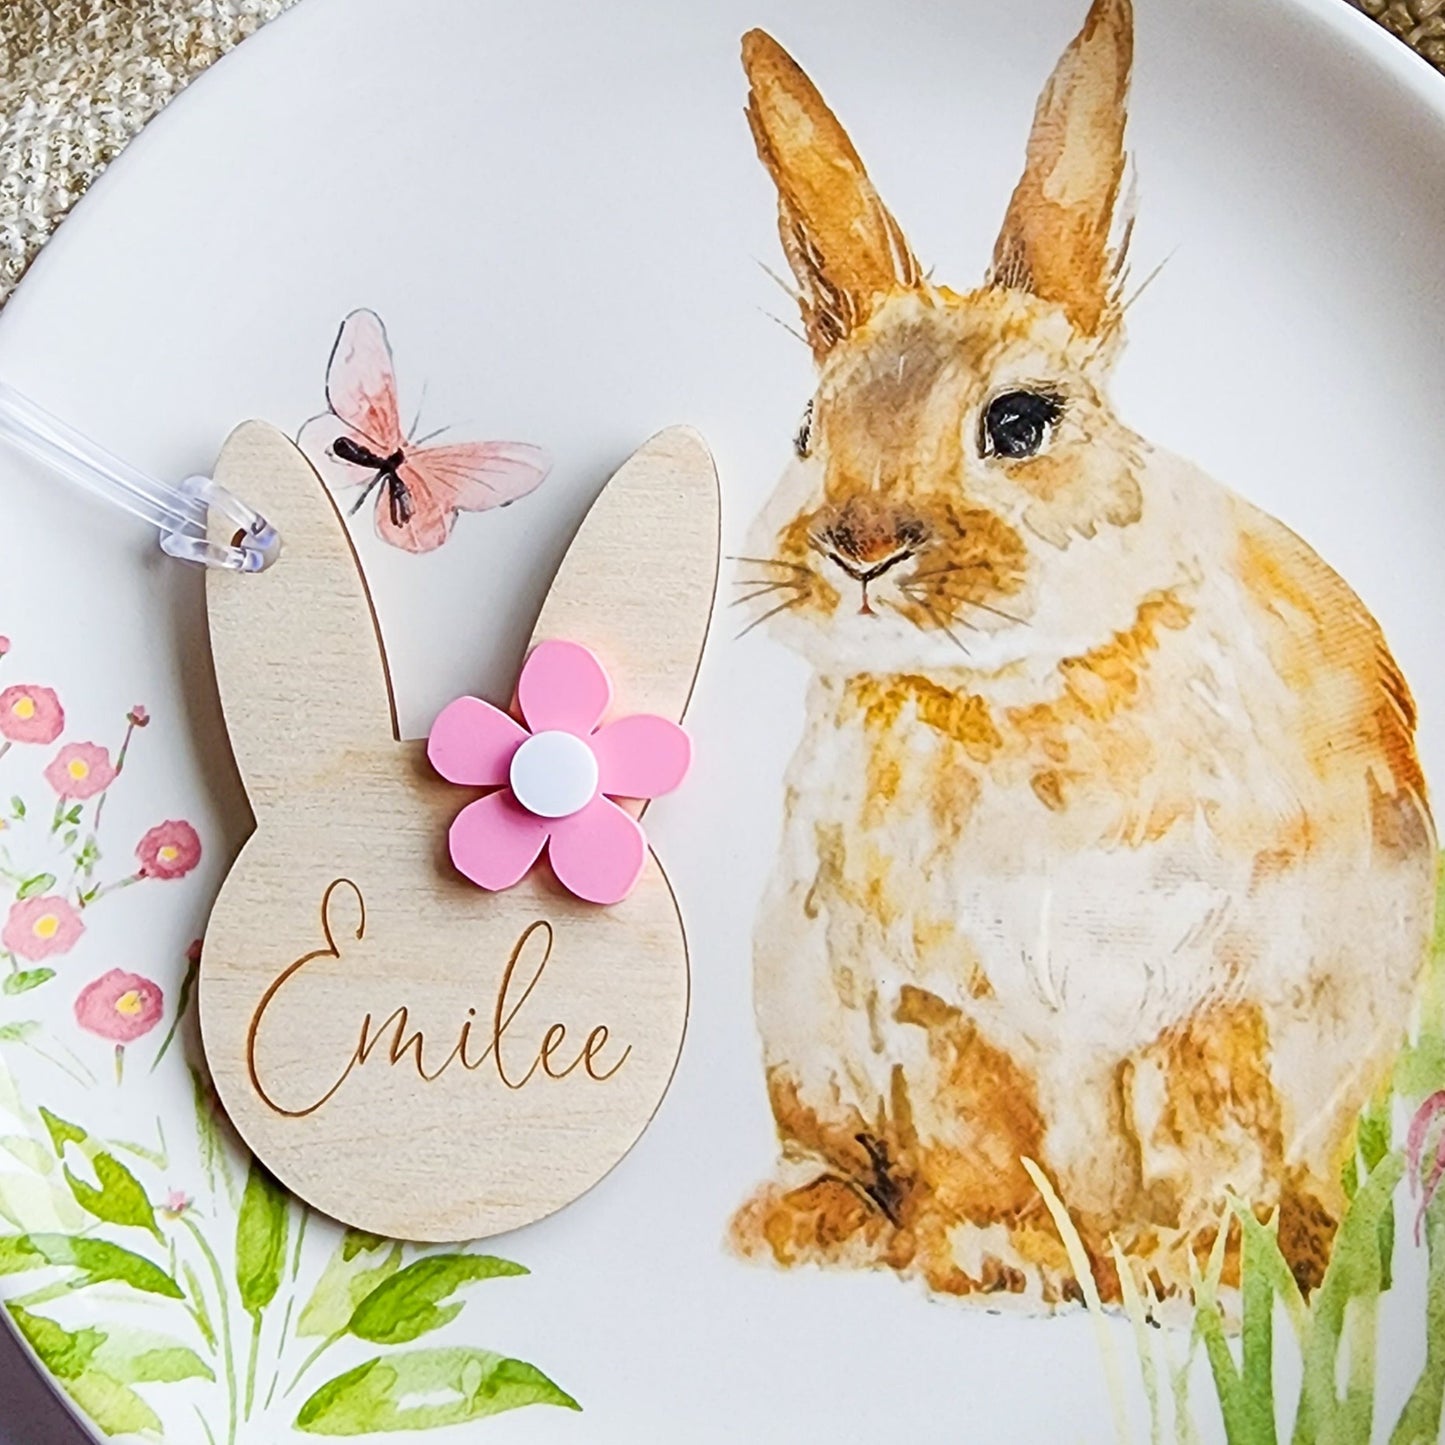 Timber Bunny Name Tag with flower